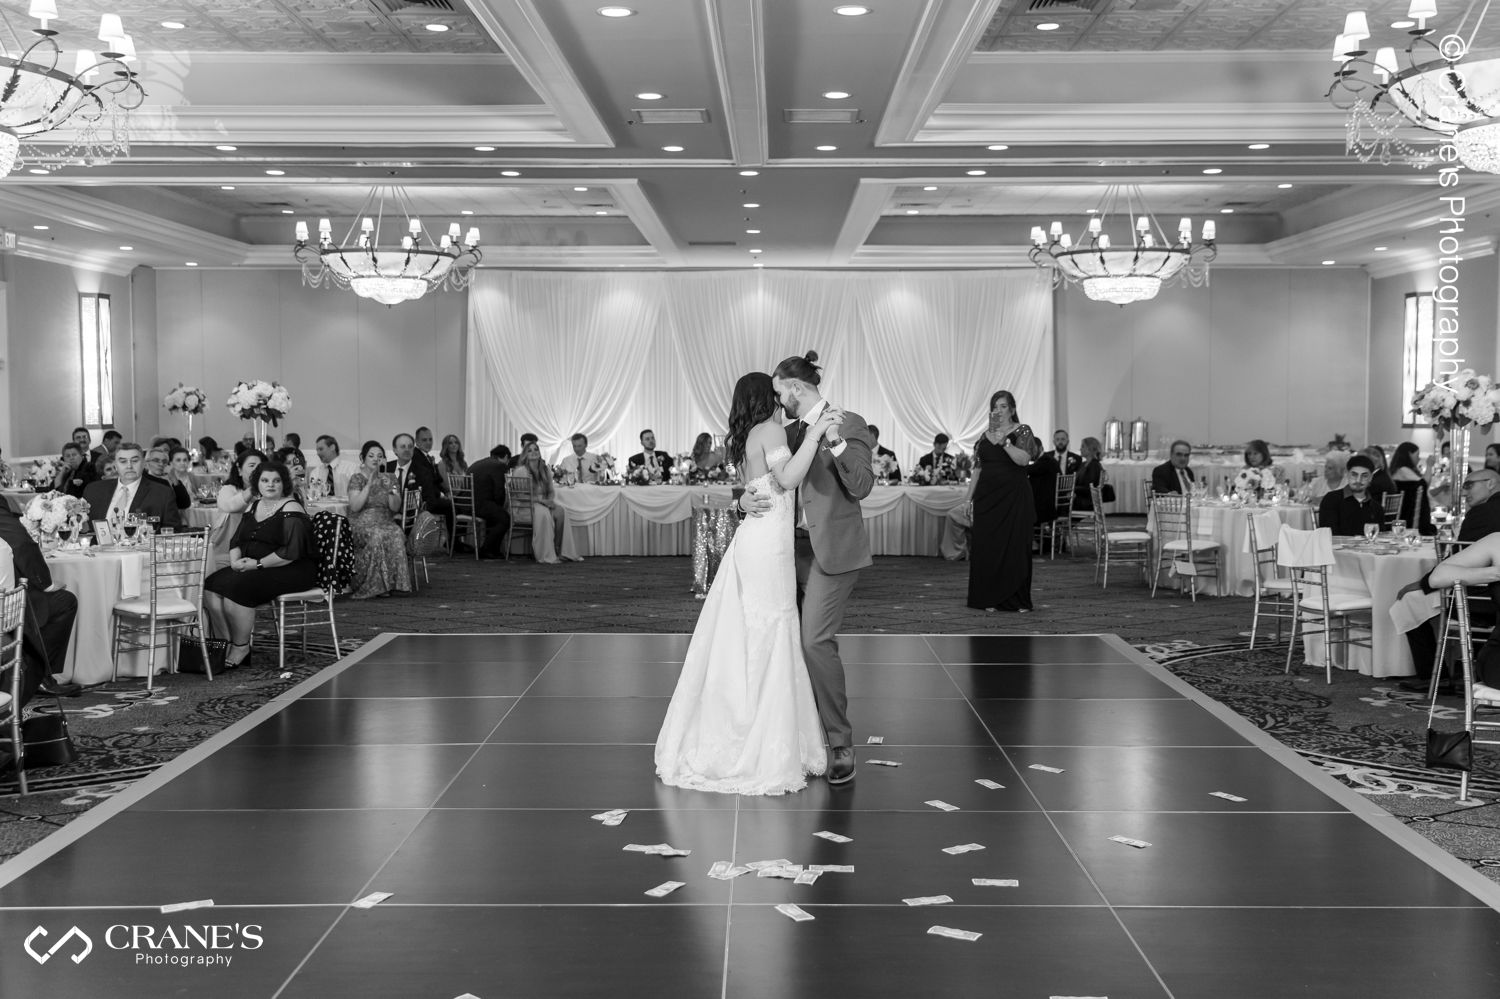 Bride and groom's first dance in the middle of the dance floor